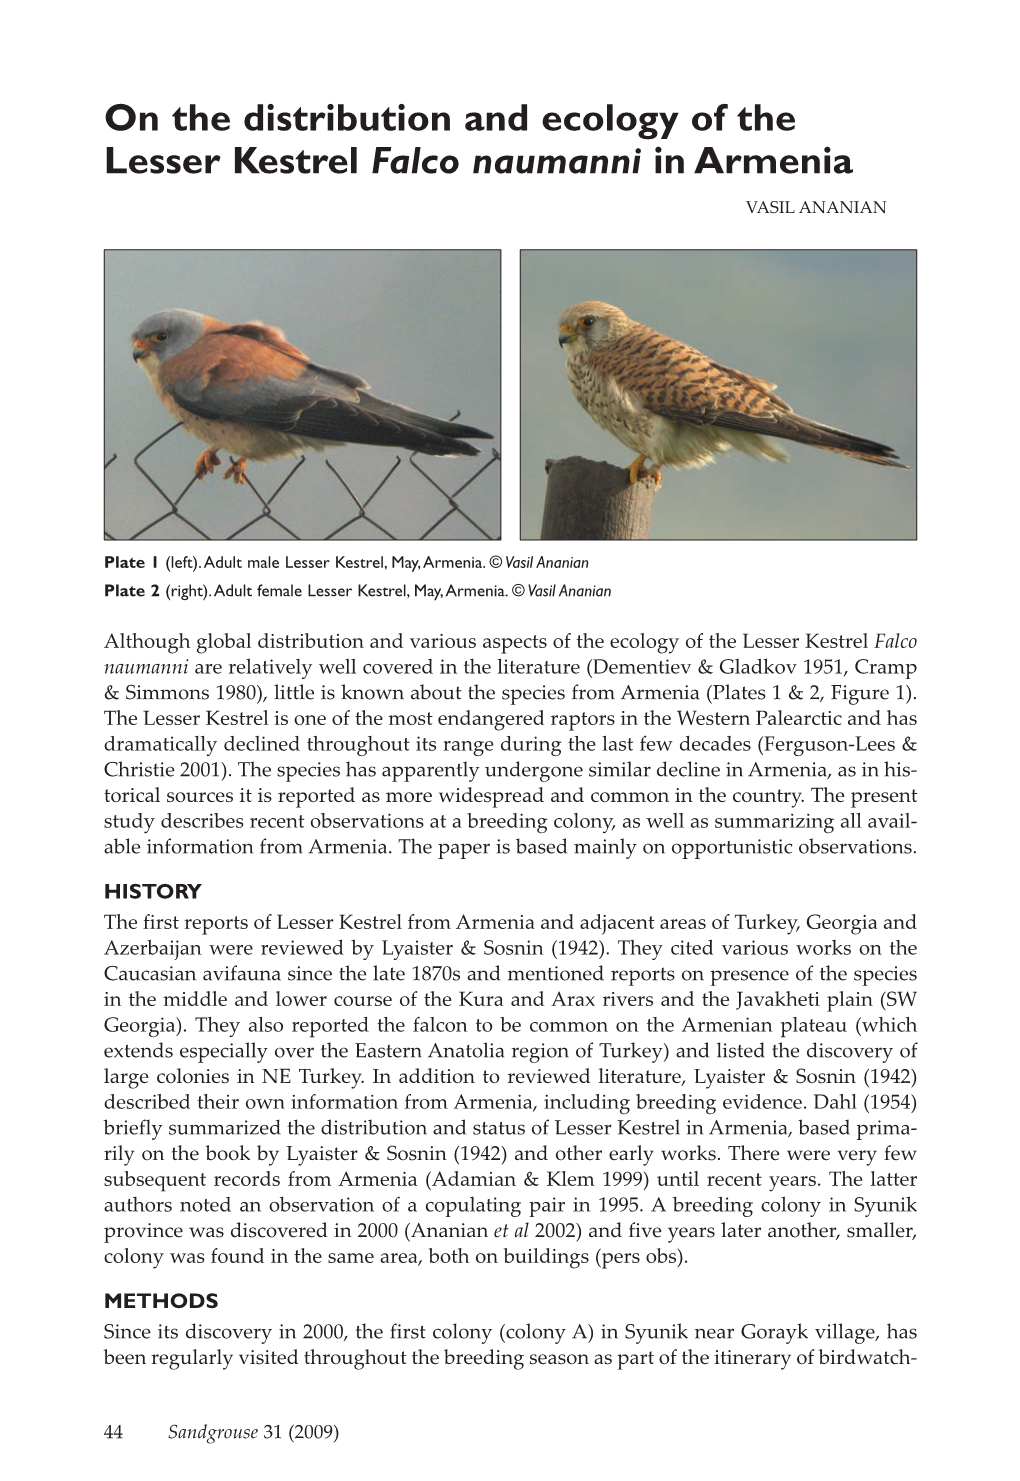 On the Distribution and Ecology of the Lesser Kestrel Falco Naumanni in Armenia